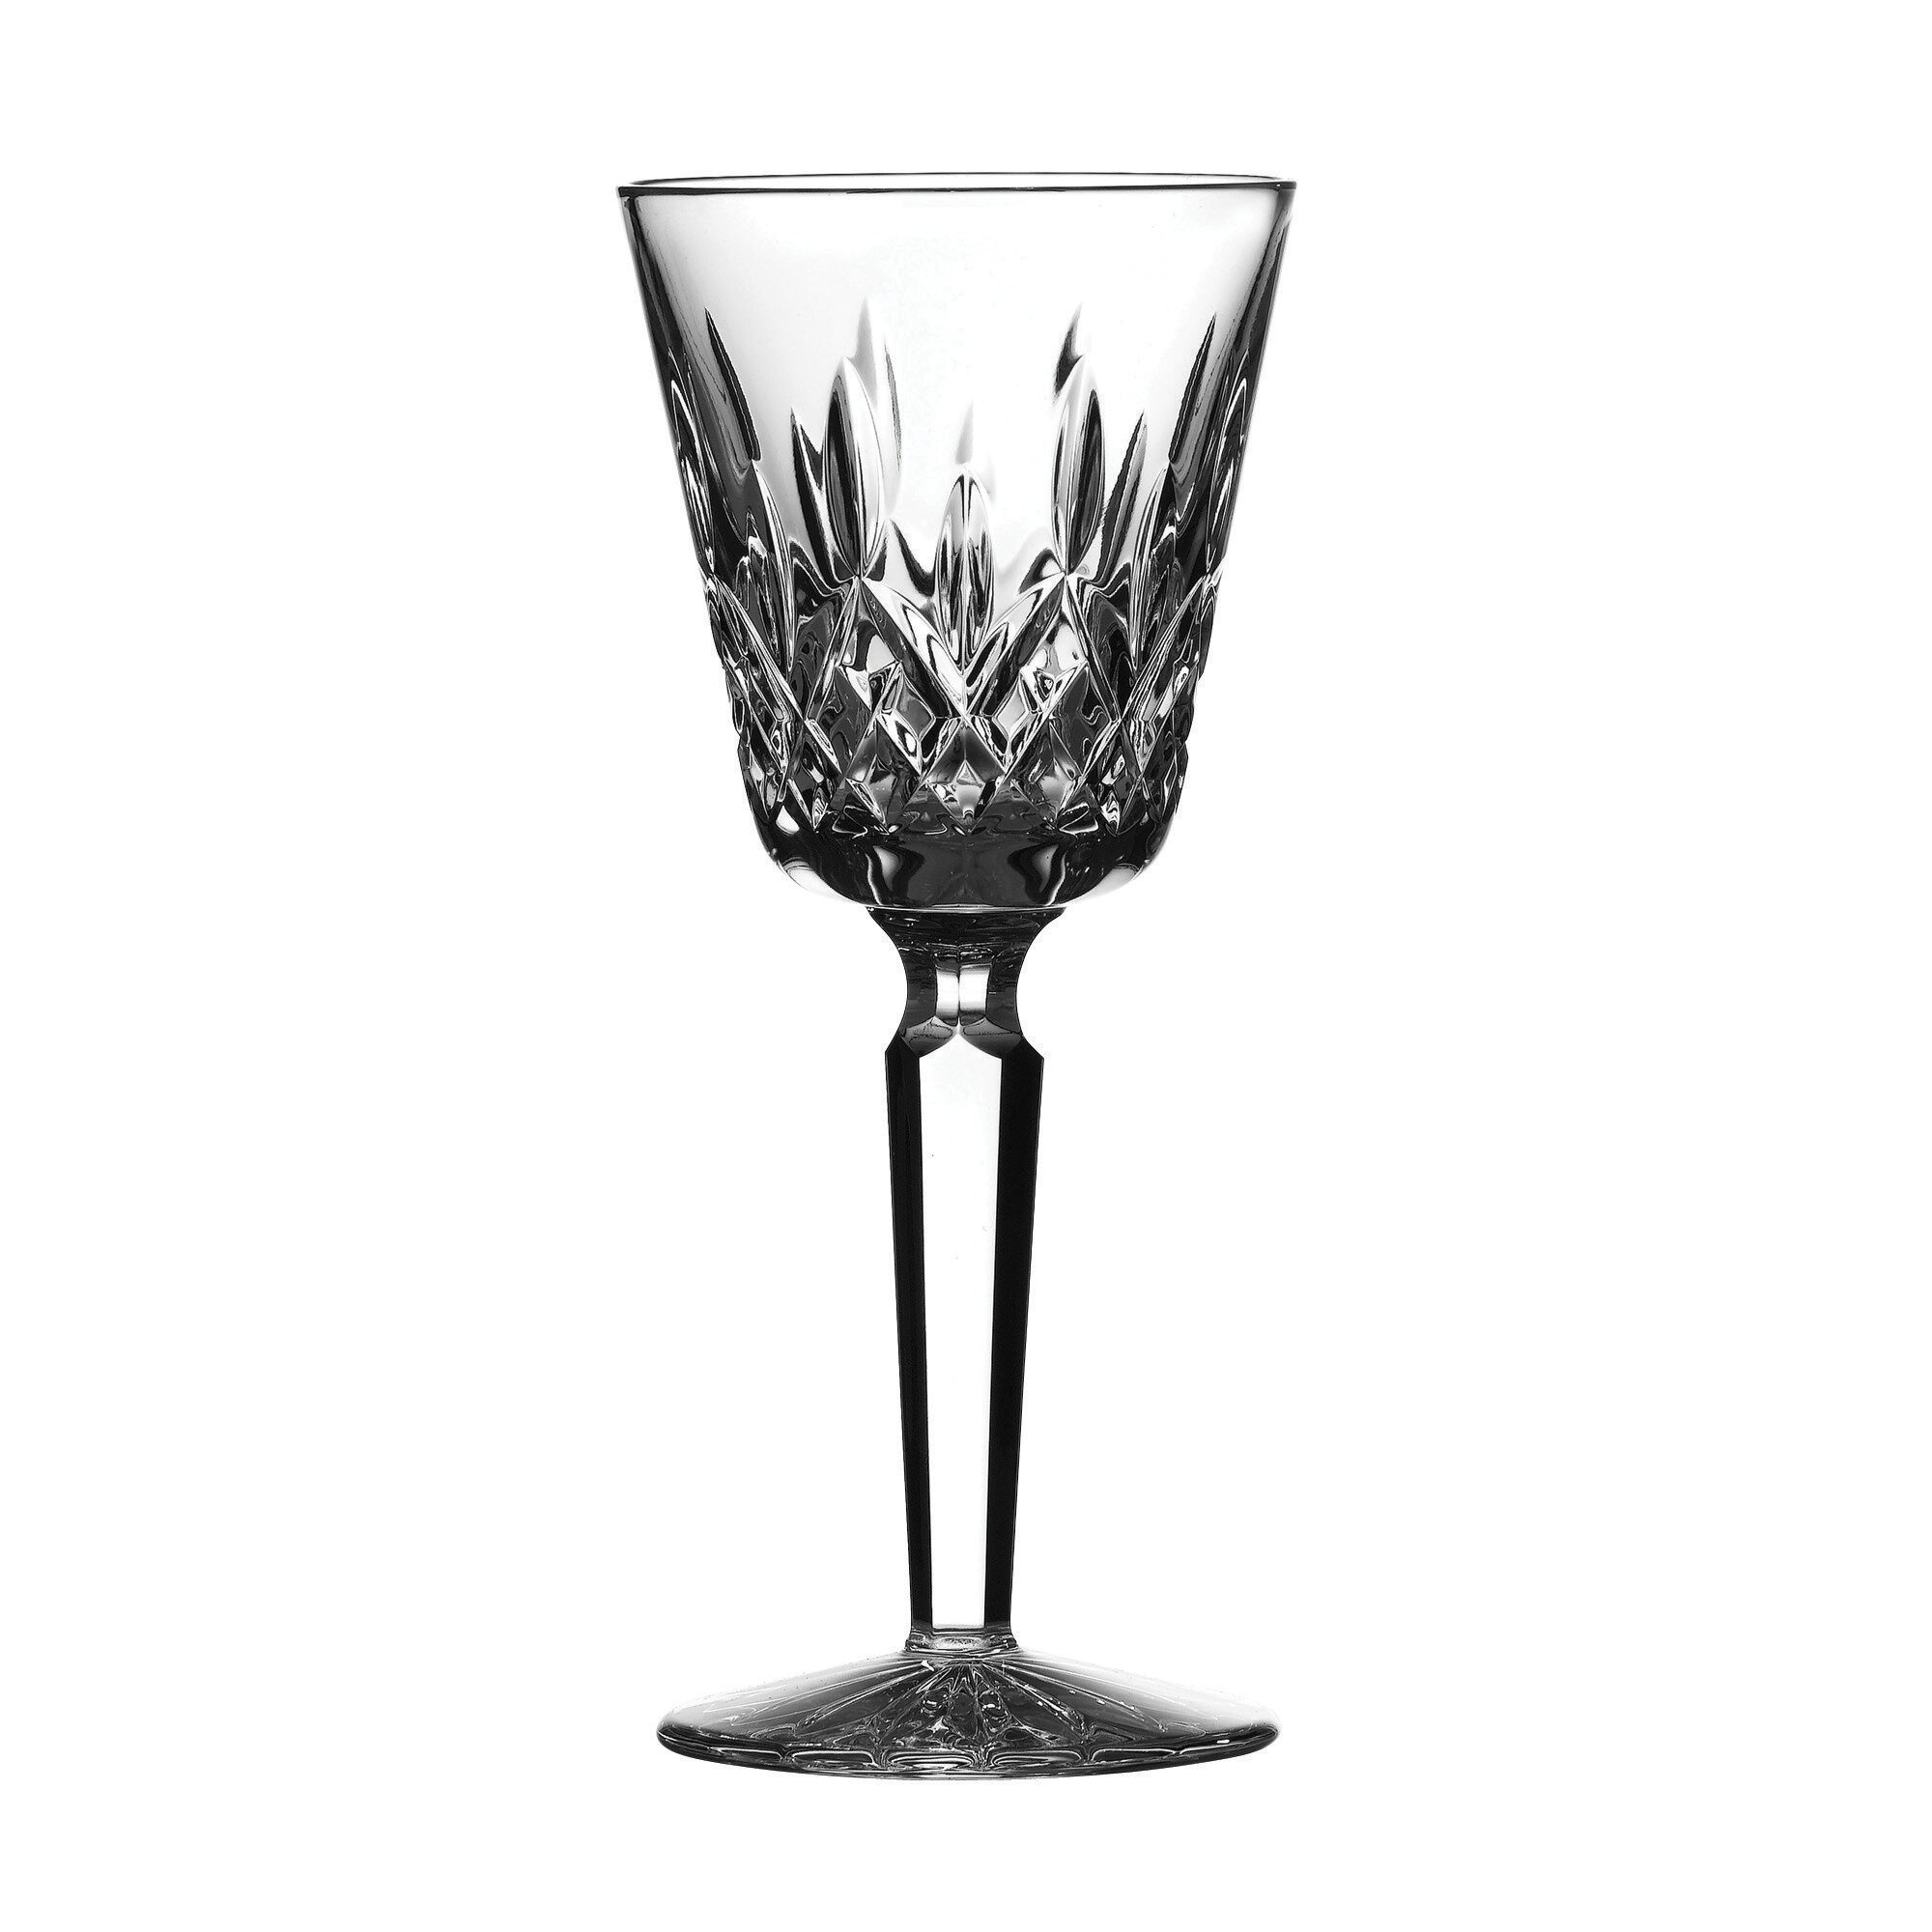 Goblet, Waterford Lismore, Exquisite lead crystal, Elegant dining, 2000x2000 HD Handy